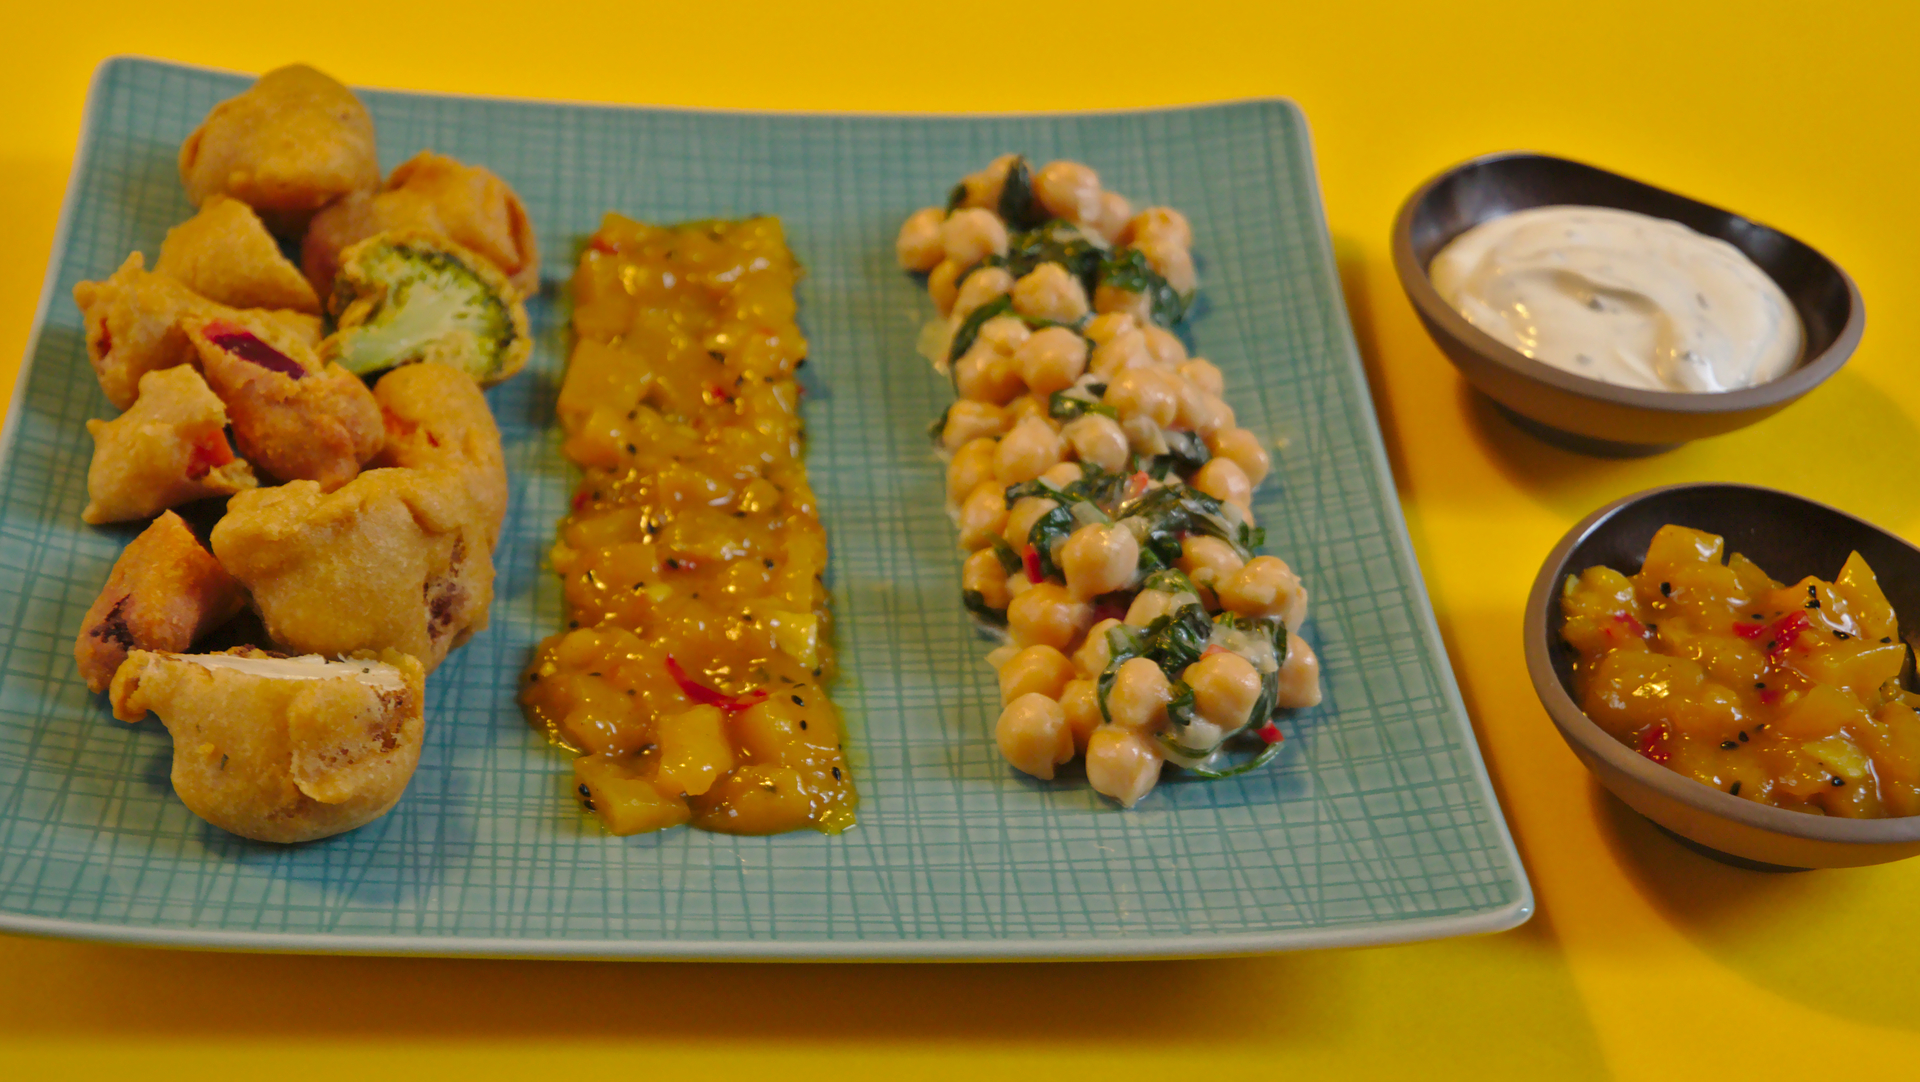 Served pakoras with chutney and coco chickpeas with spinach